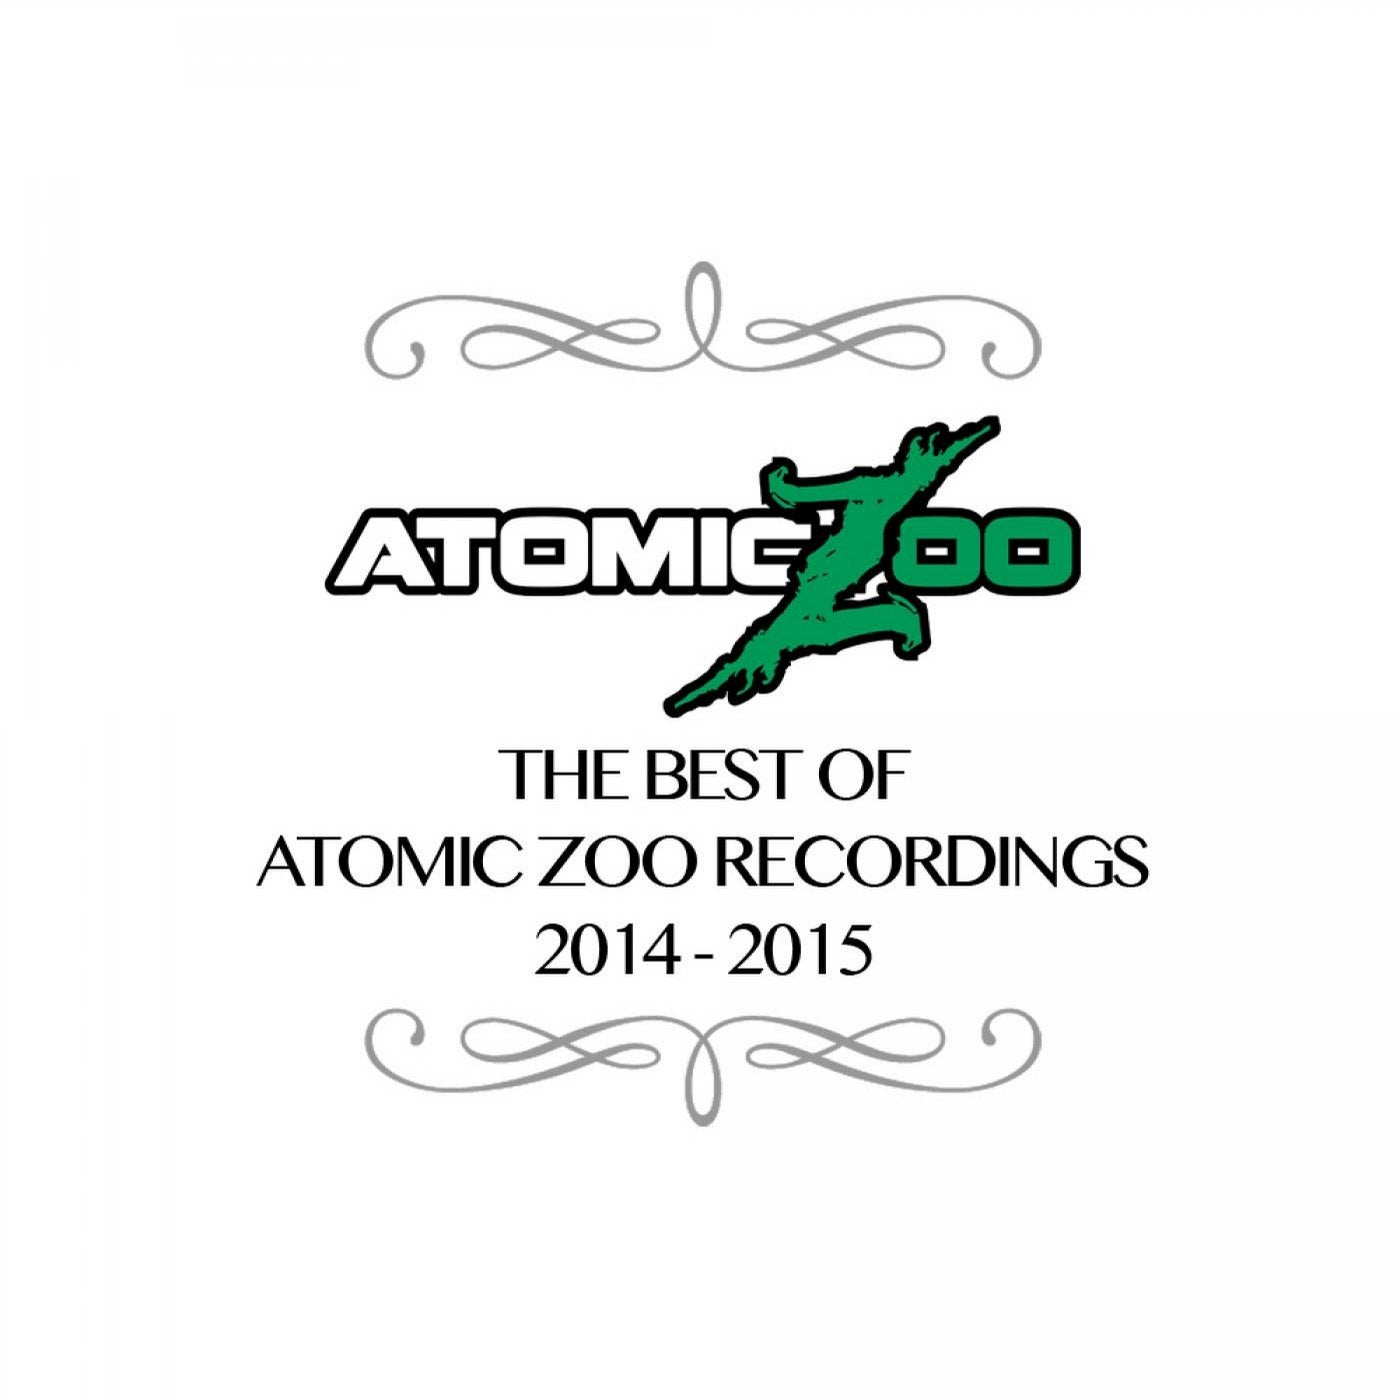 The Best of Atomic Zoo Recordings 2014-2015